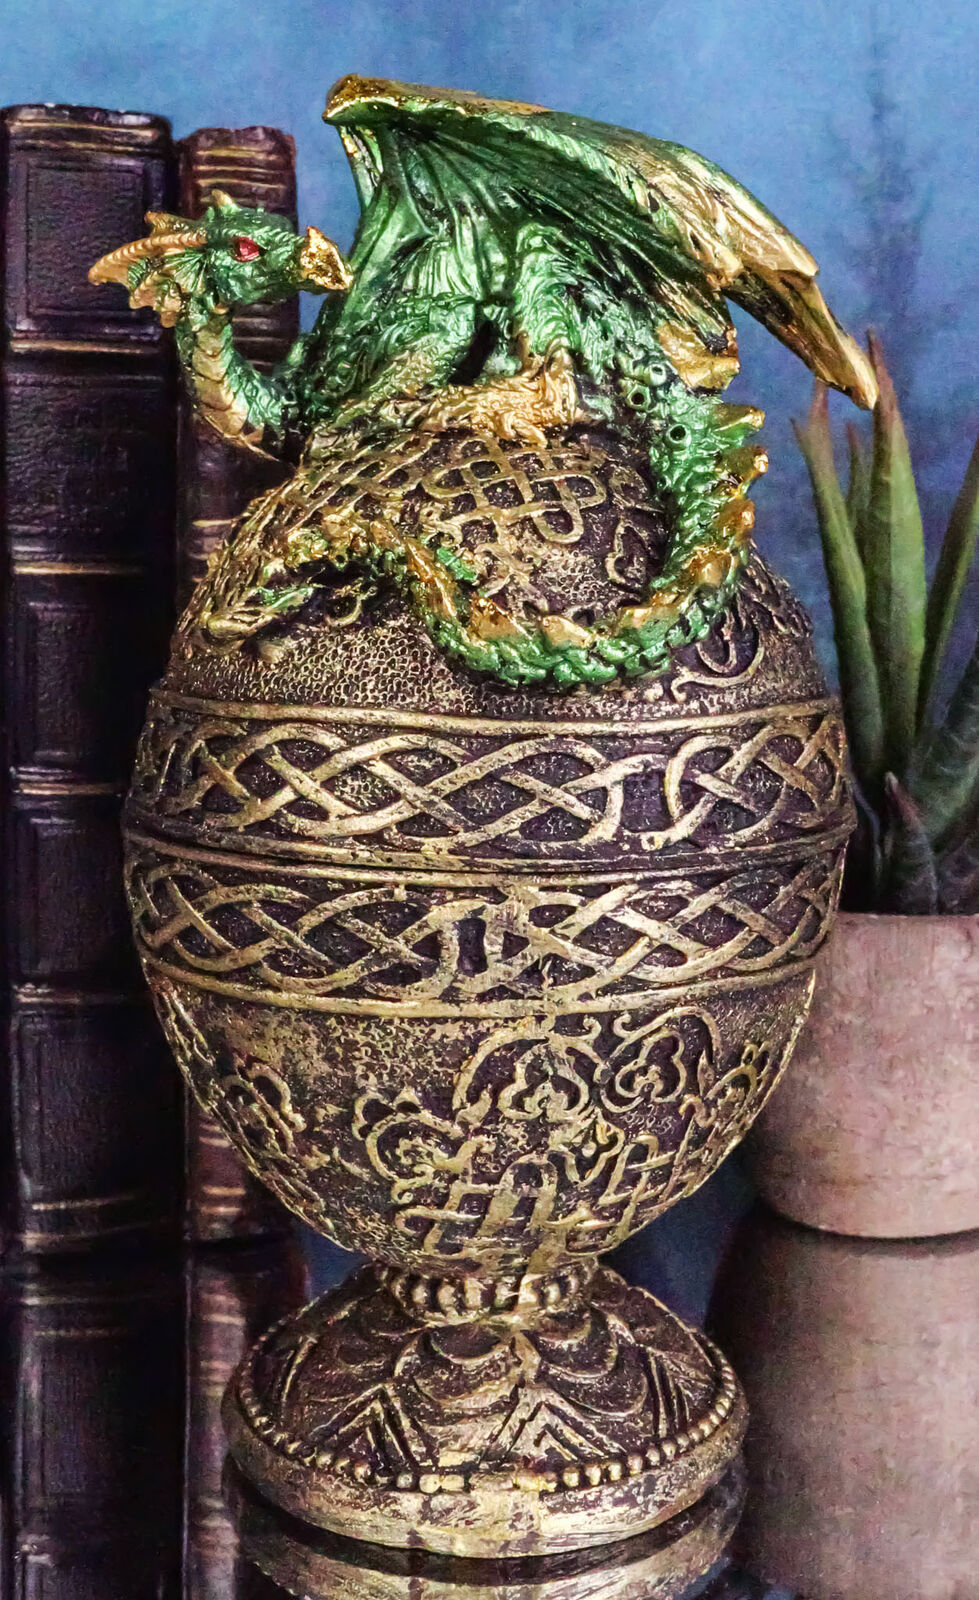 Ebros Green Dragon Perching On Celtic Knotwork Relic Golden Egg Jewelry Box